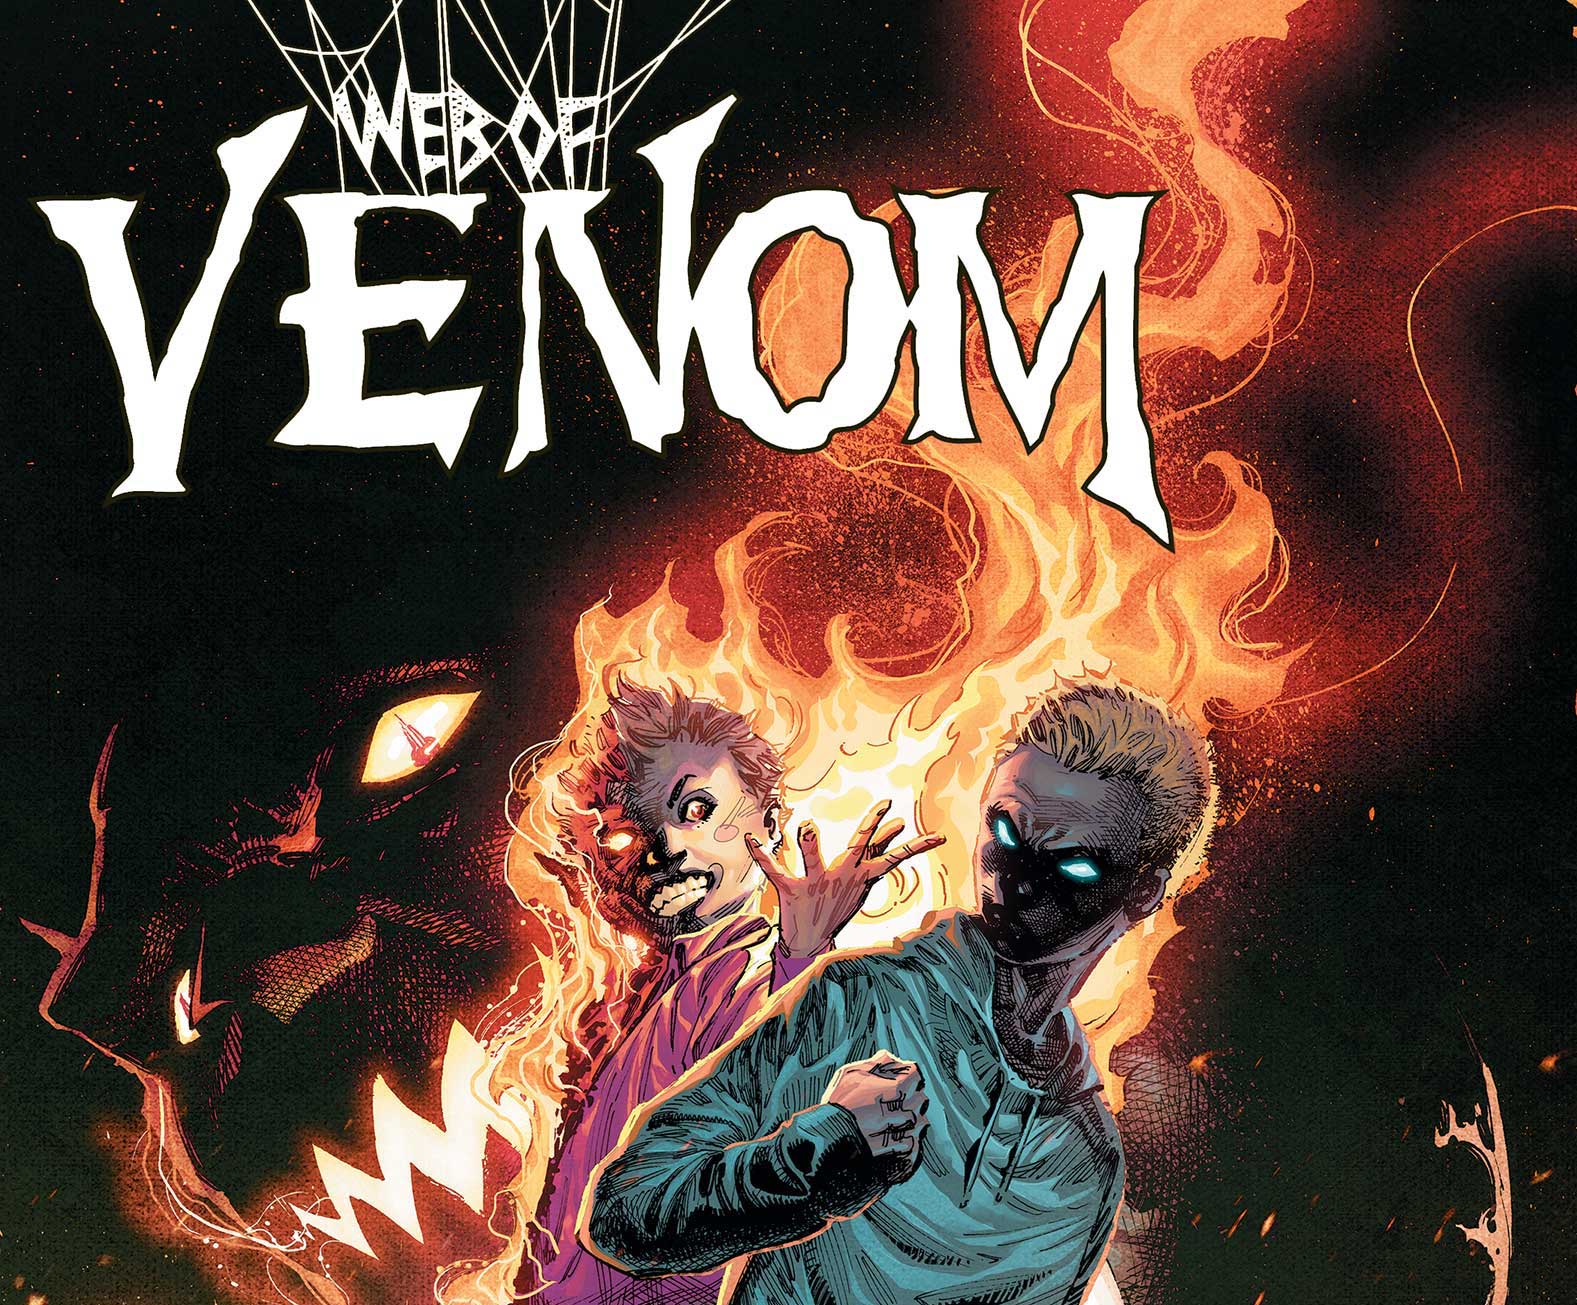 Web of Venom: The Good Son #1 Review